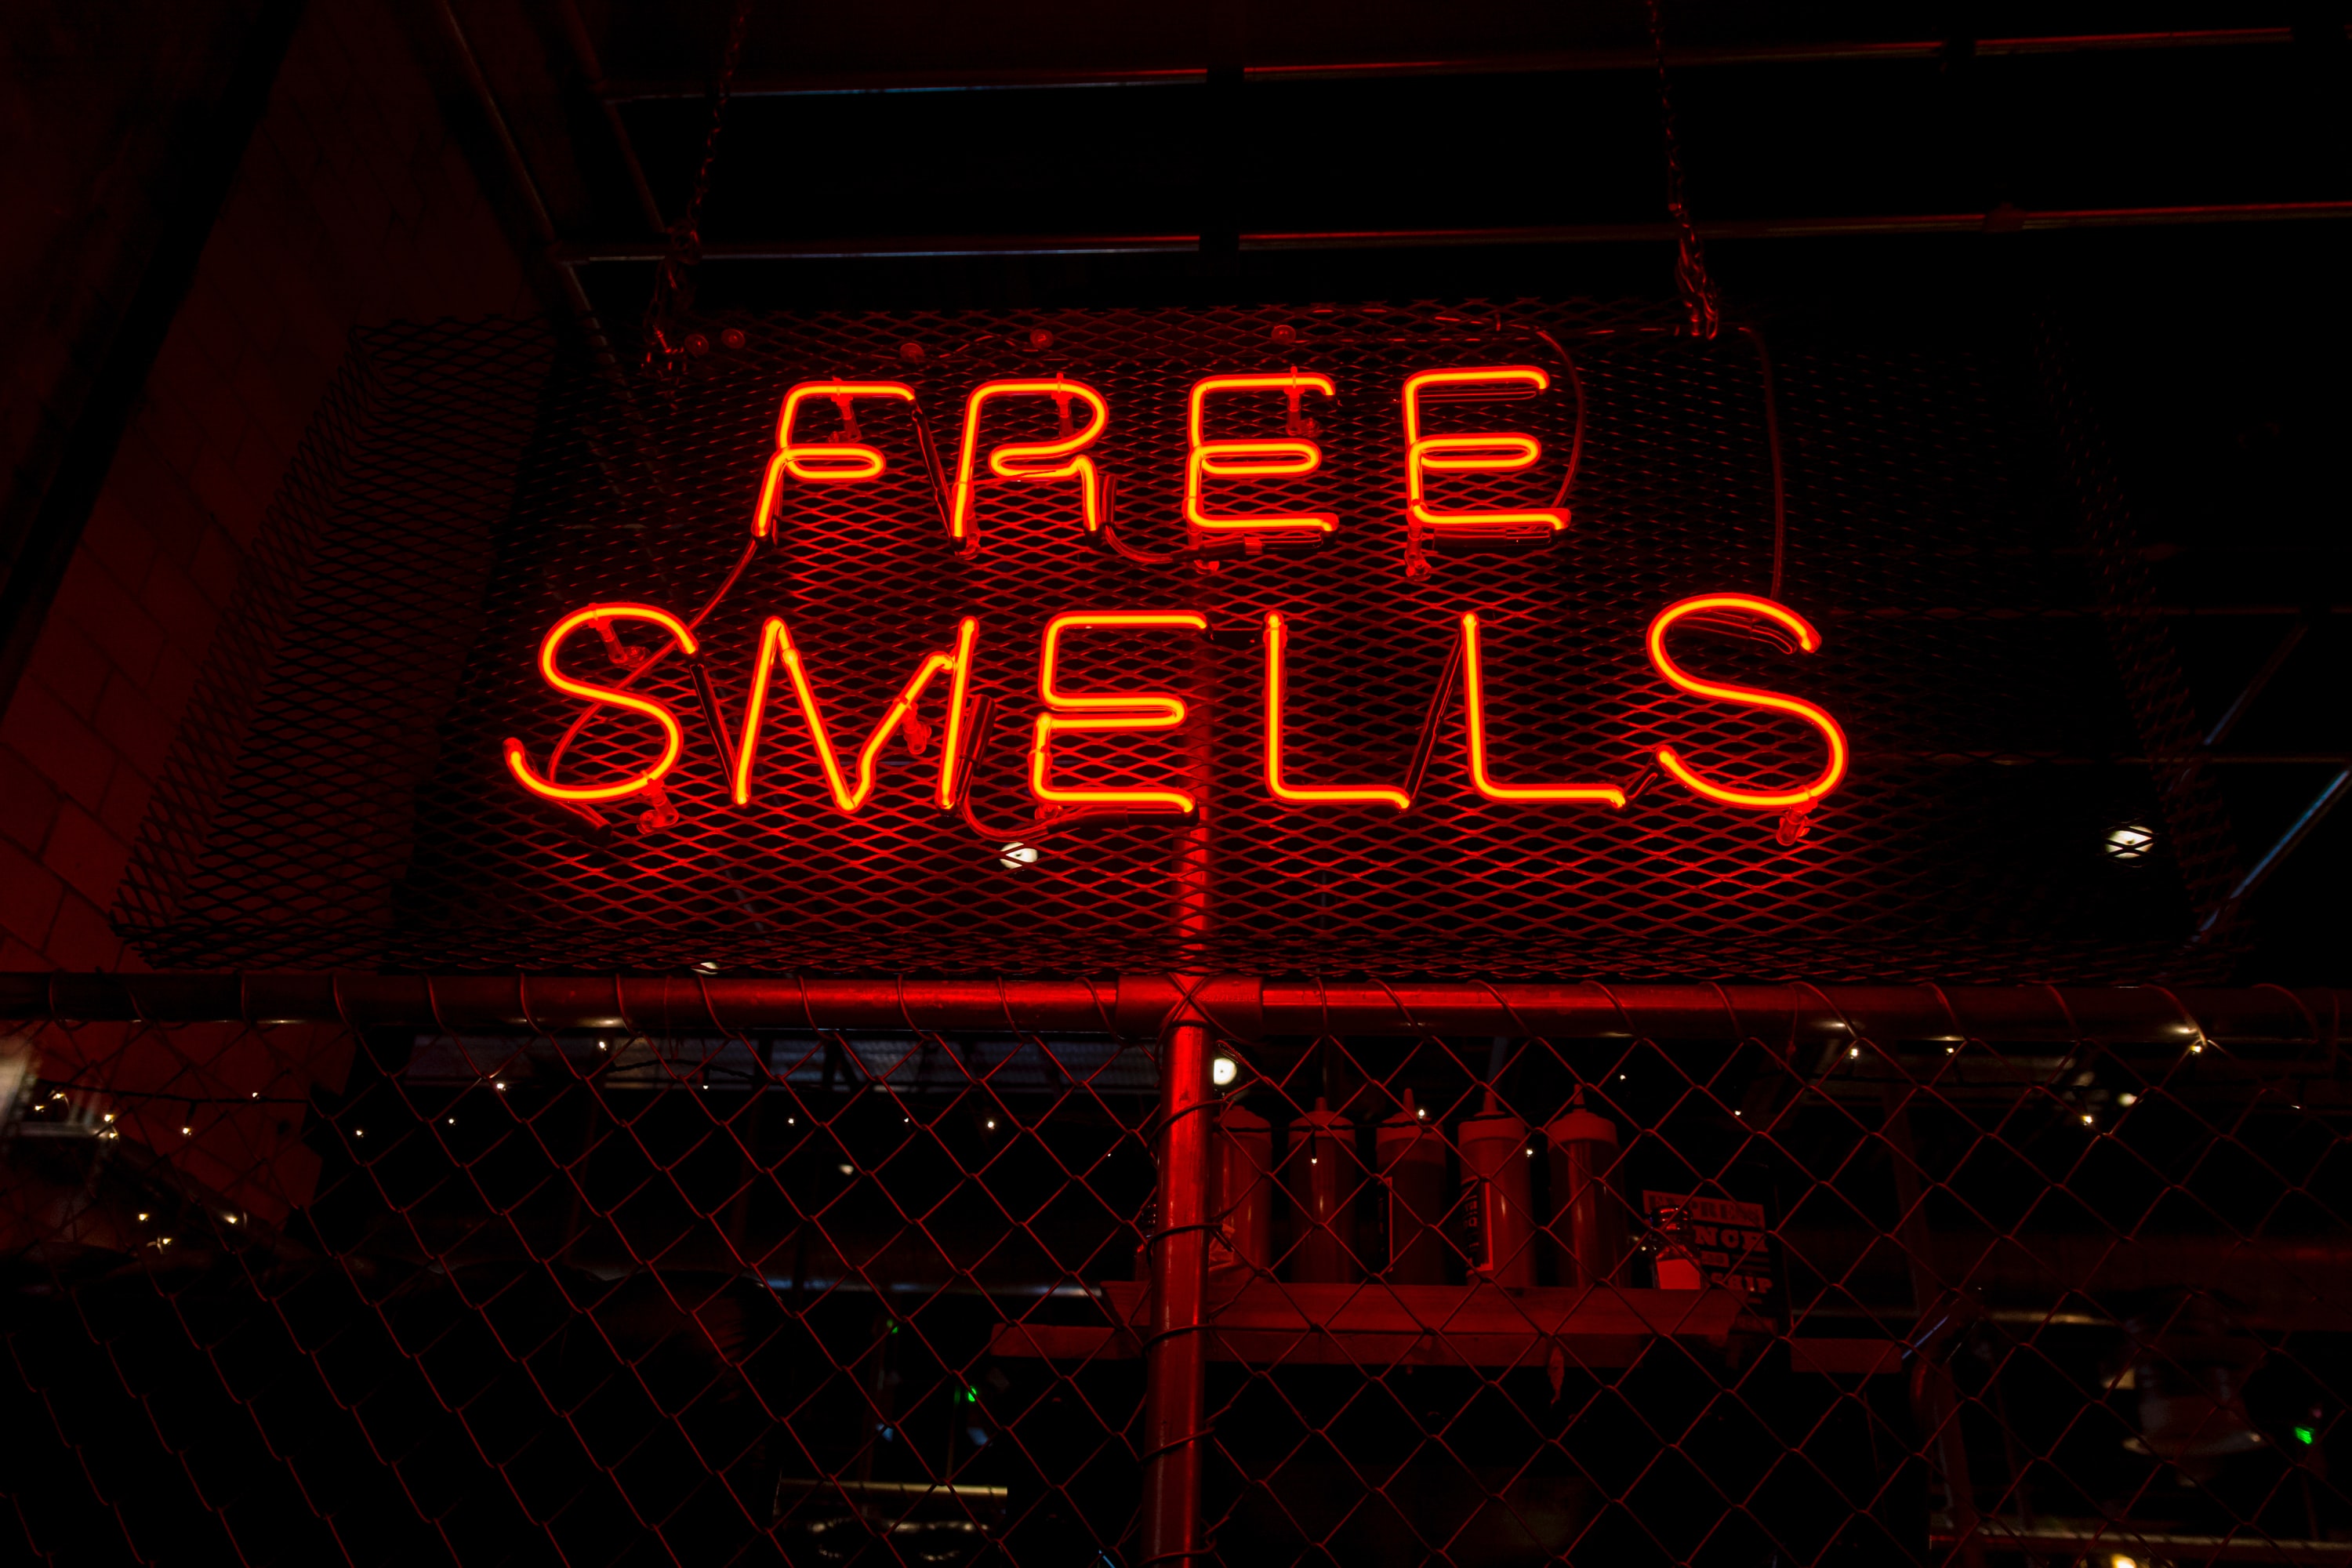 Neon sign "Free Smells" at night